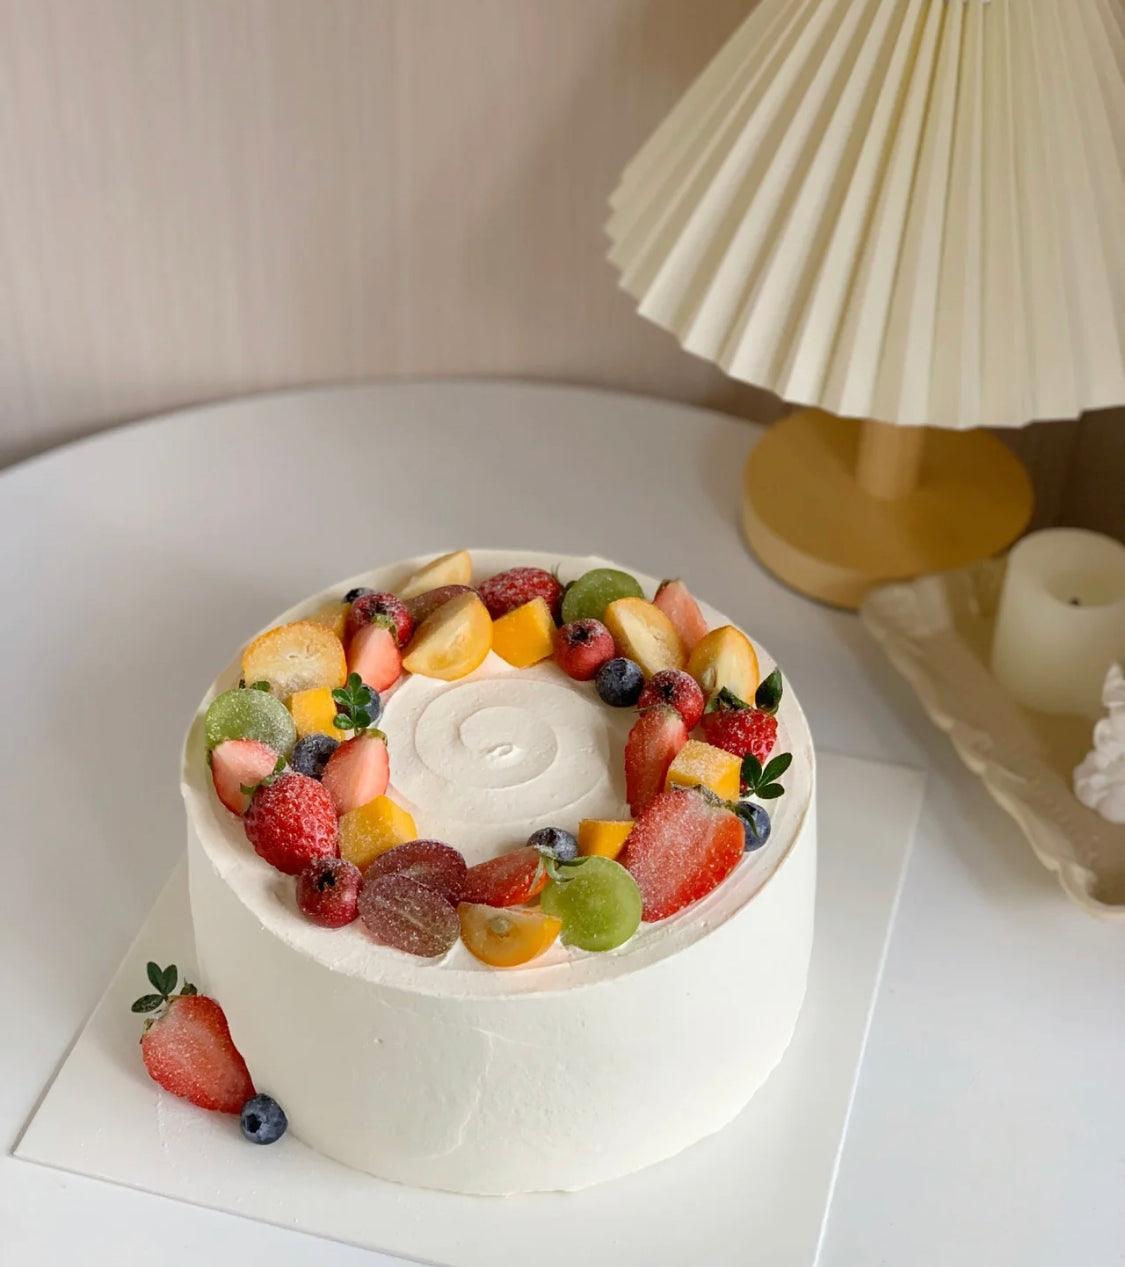 Classic fruits cake - ONE UP BALLOONS